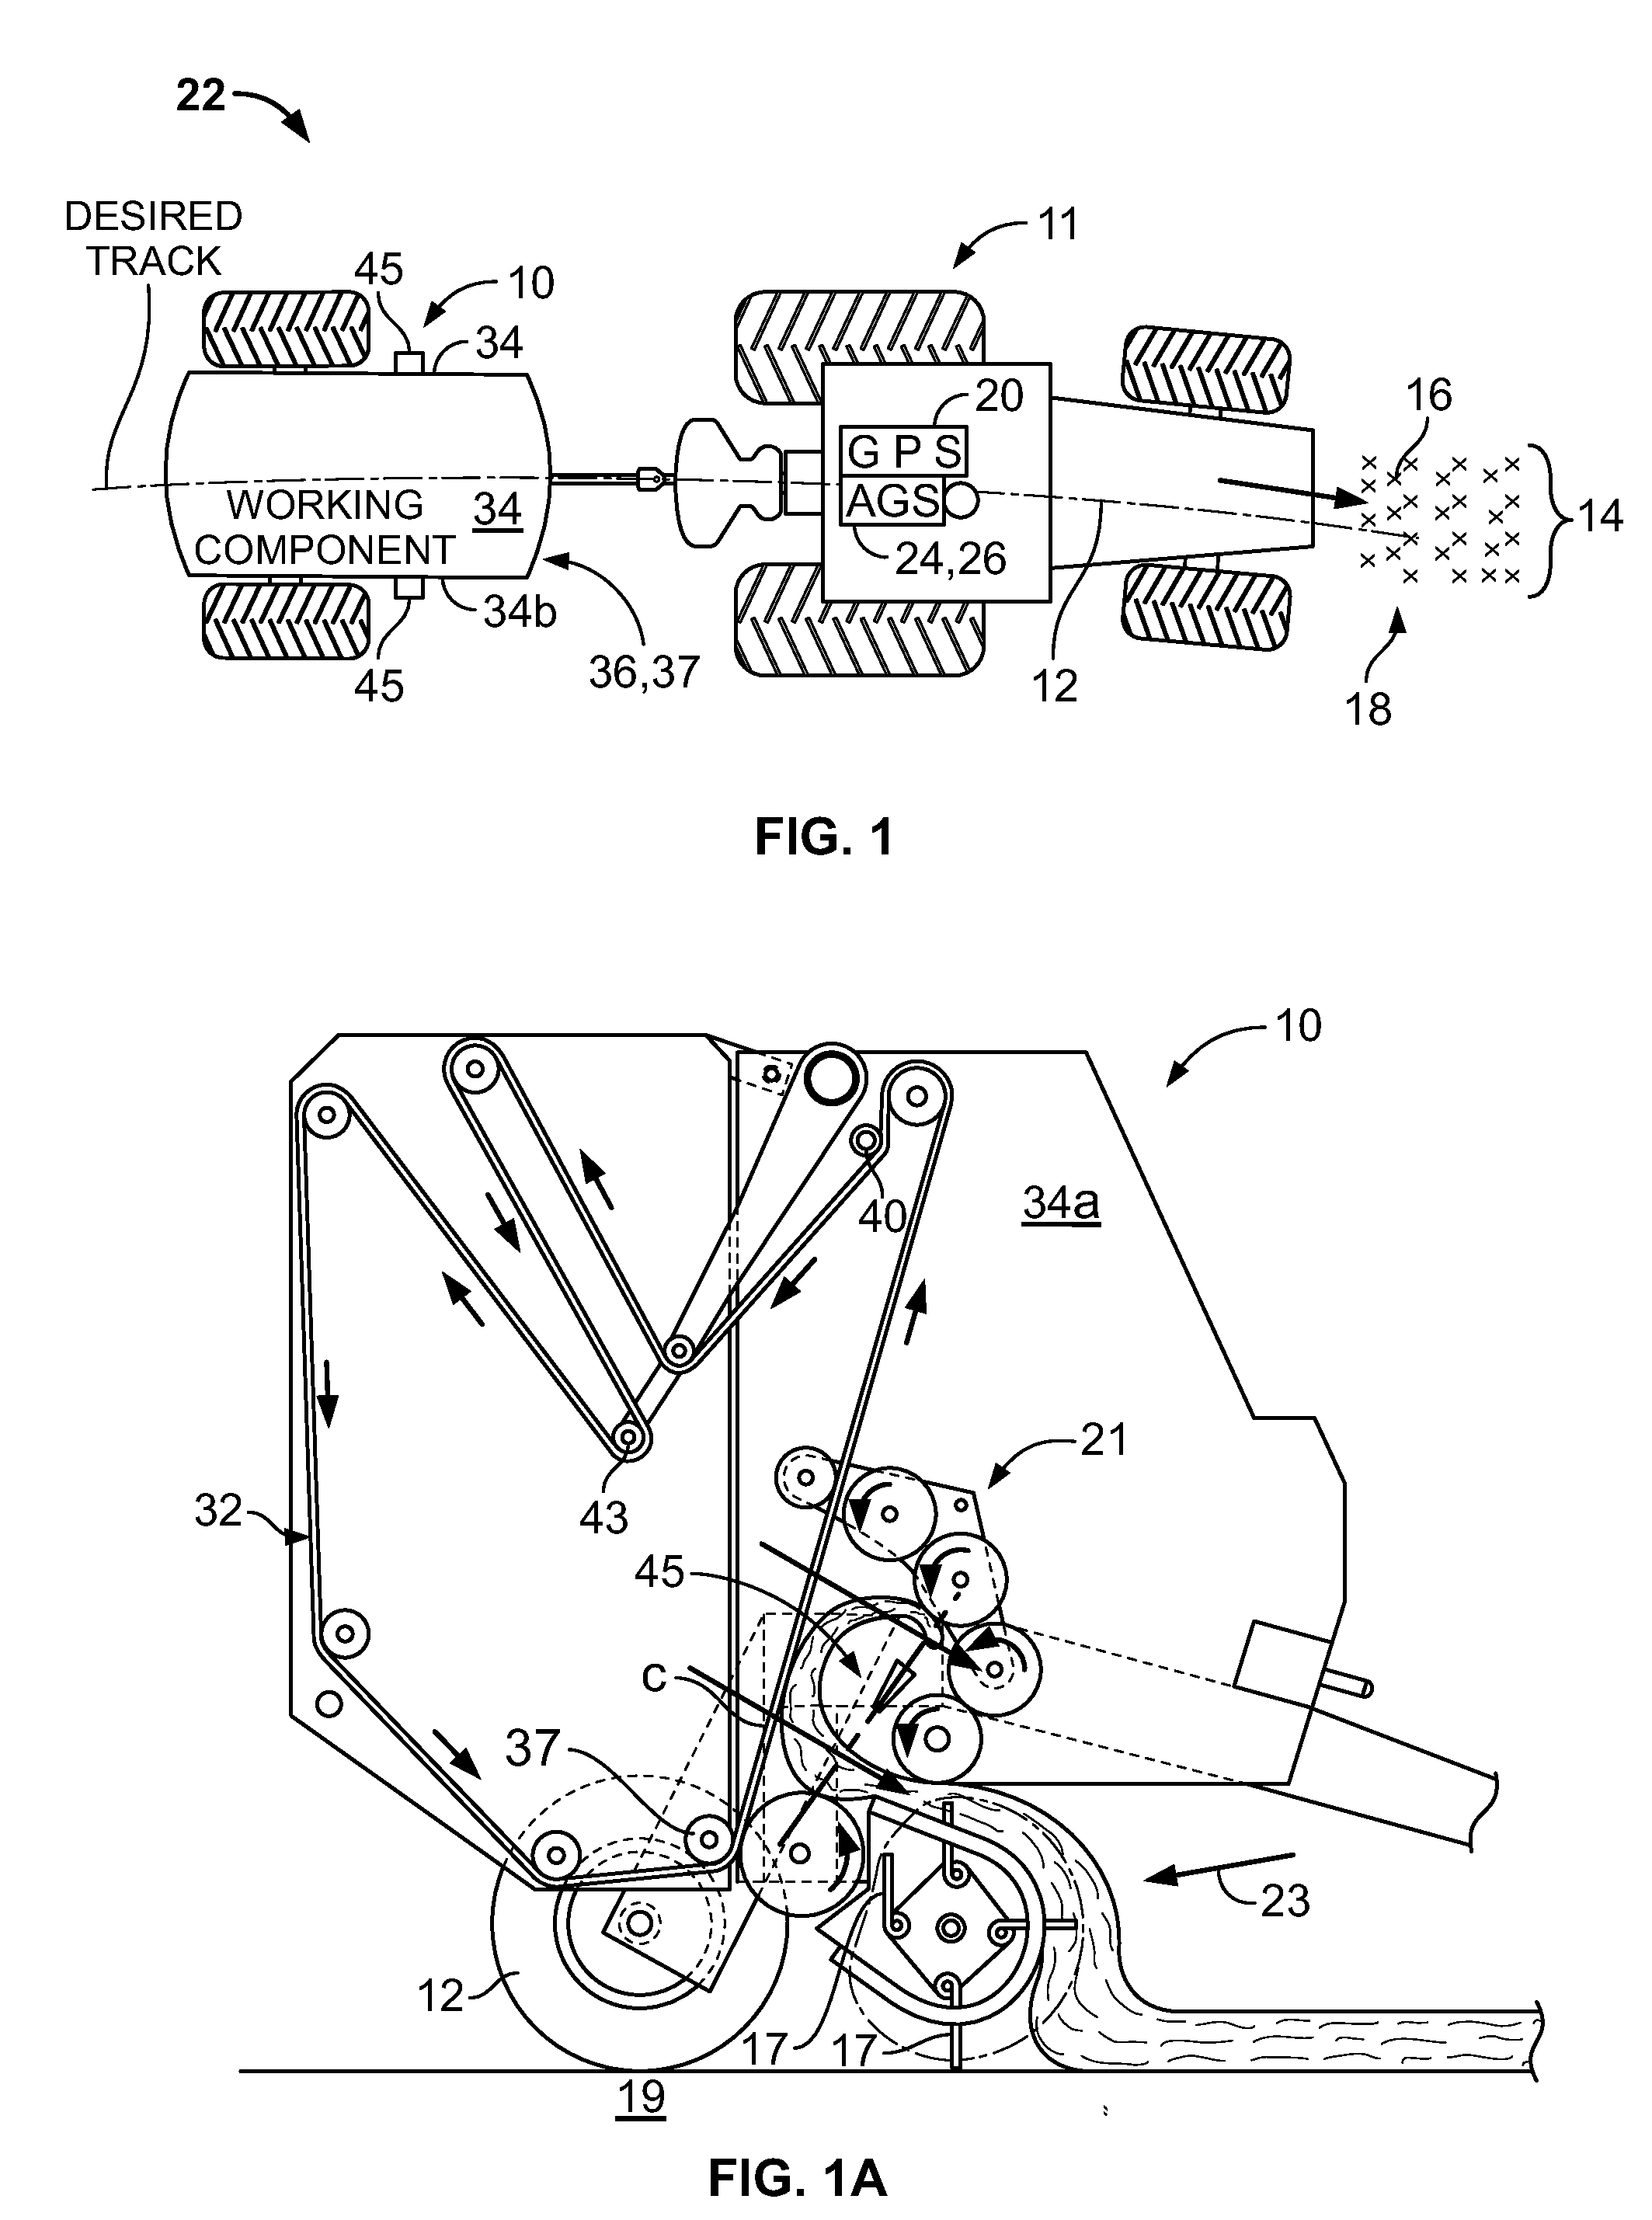 Guidance method for agricultural vehicle